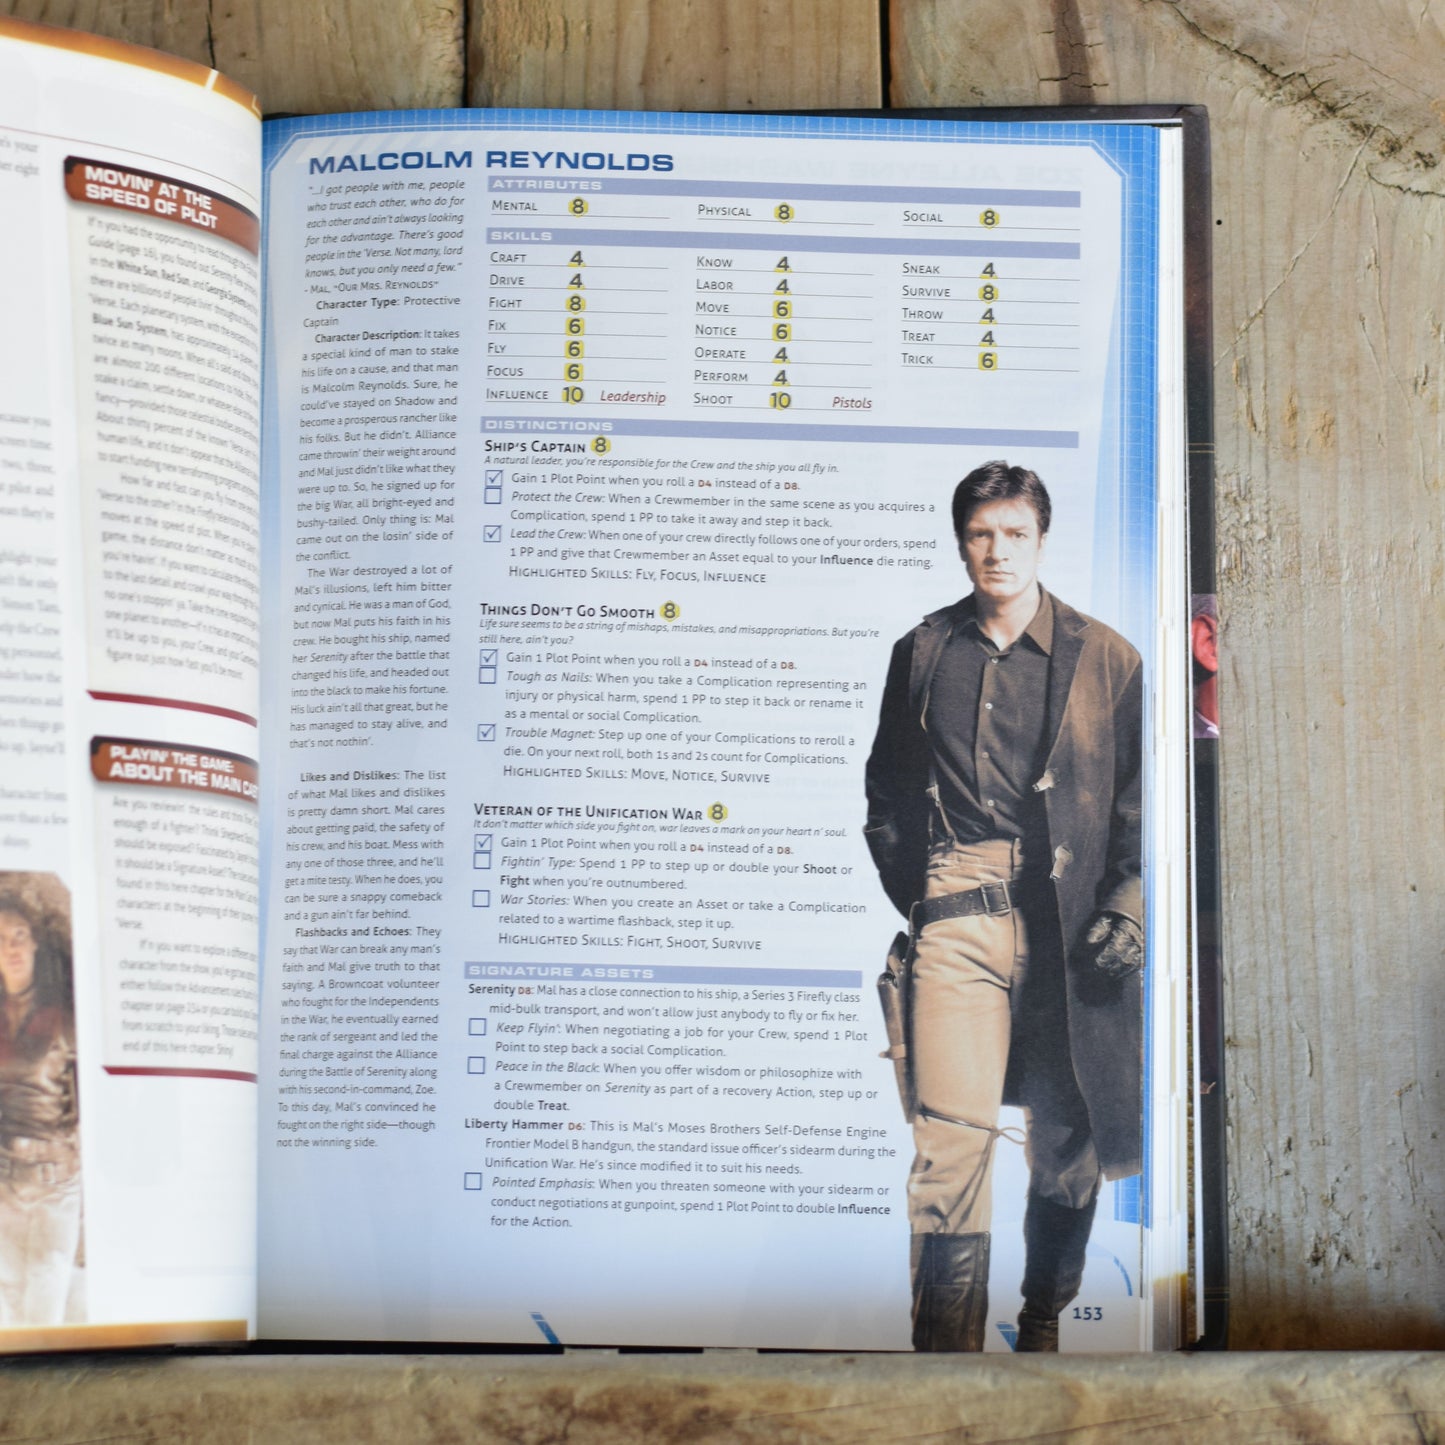 RPG Hardback: Firefly Role-Playing Game Core Rule Book